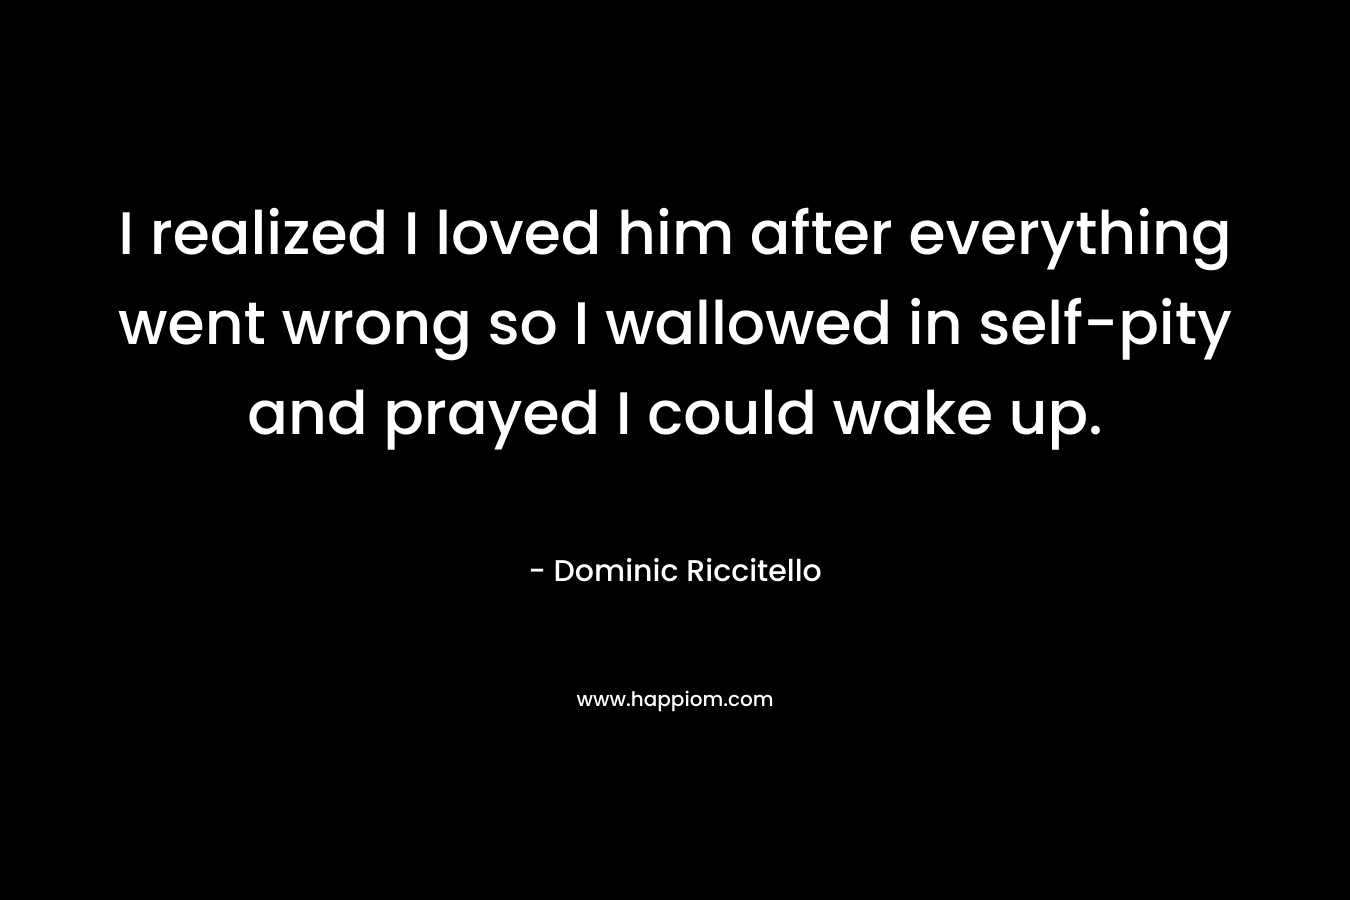 I realized I loved him after everything went wrong so I wallowed in self-pity and prayed I could wake up.